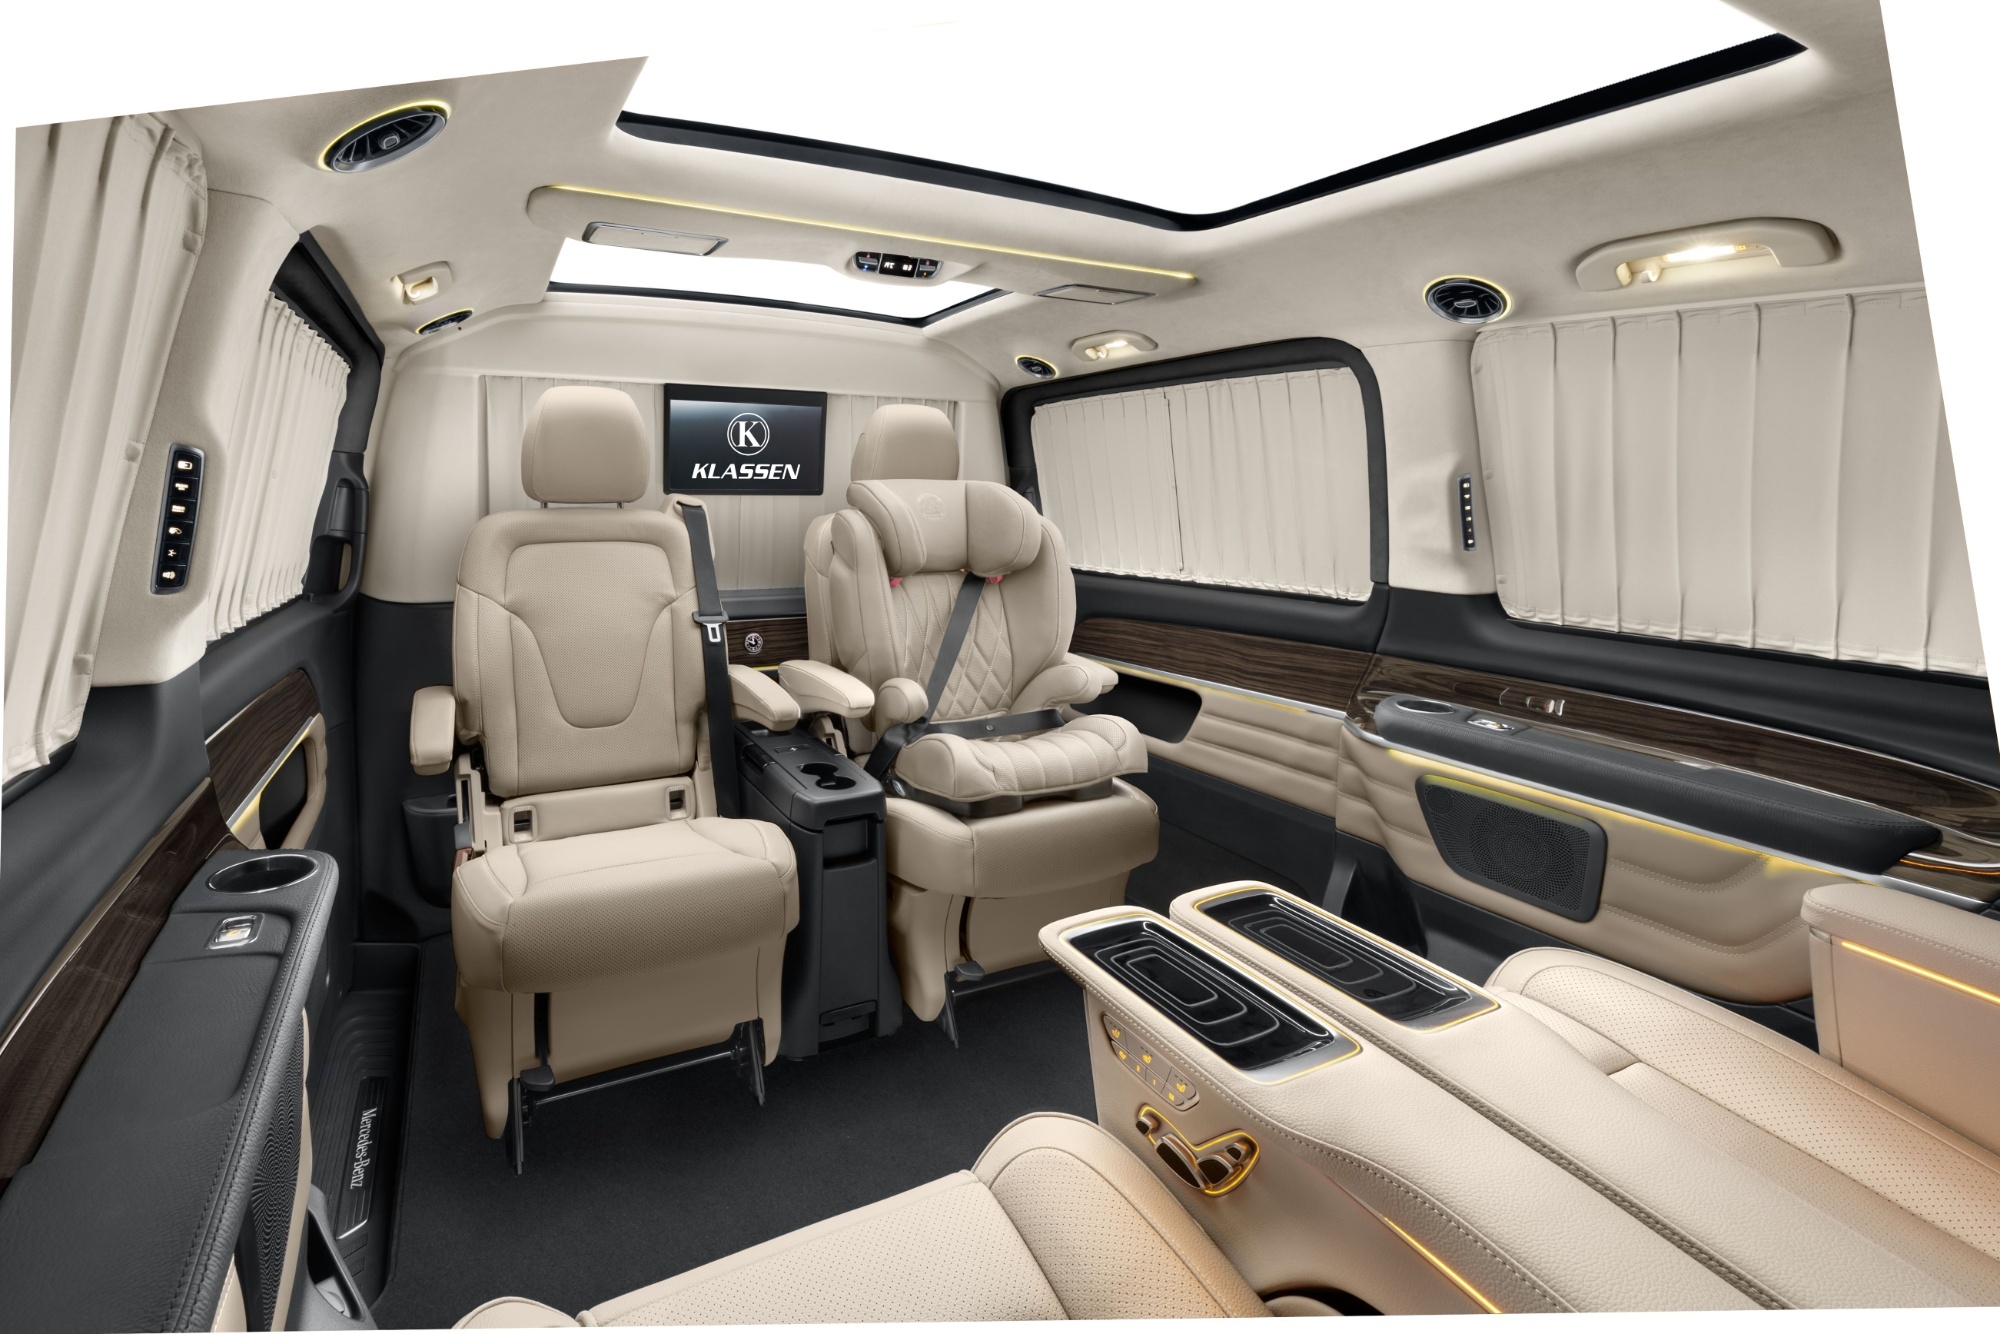 The MercedesBenz VClass combines comfort and luxury on a large scale